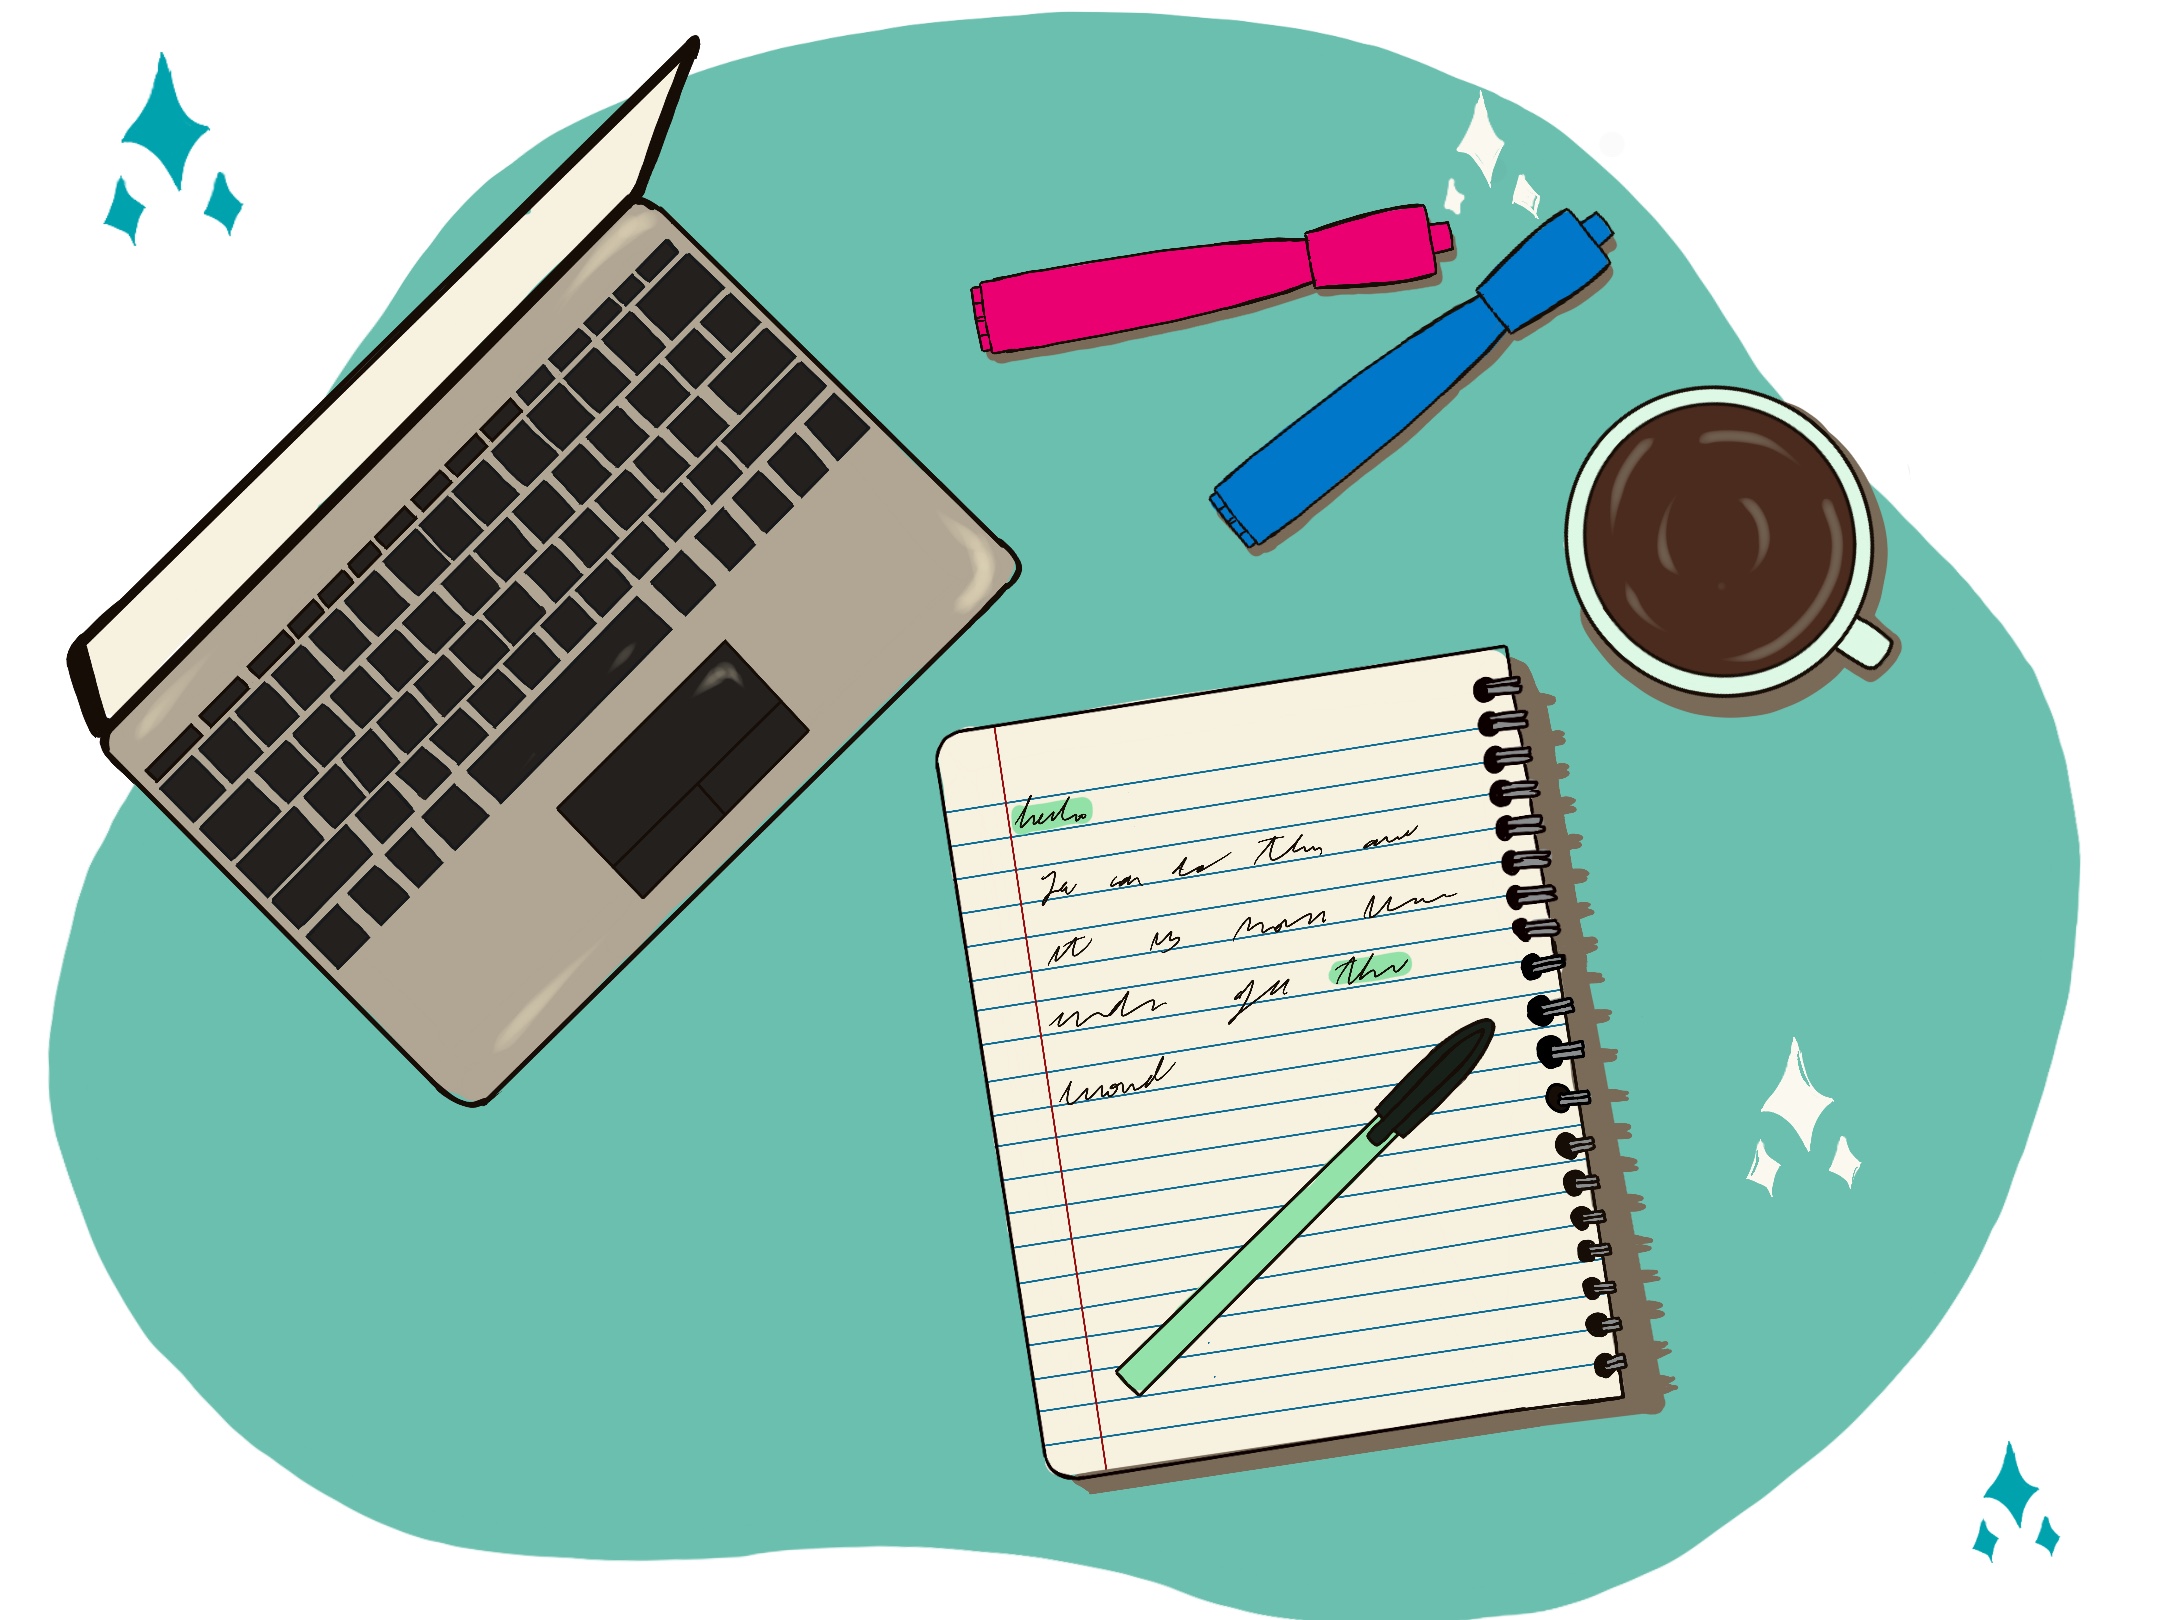 Cartoon drawing of work desk with laptop, notebook, writing utensils and coffee mug.